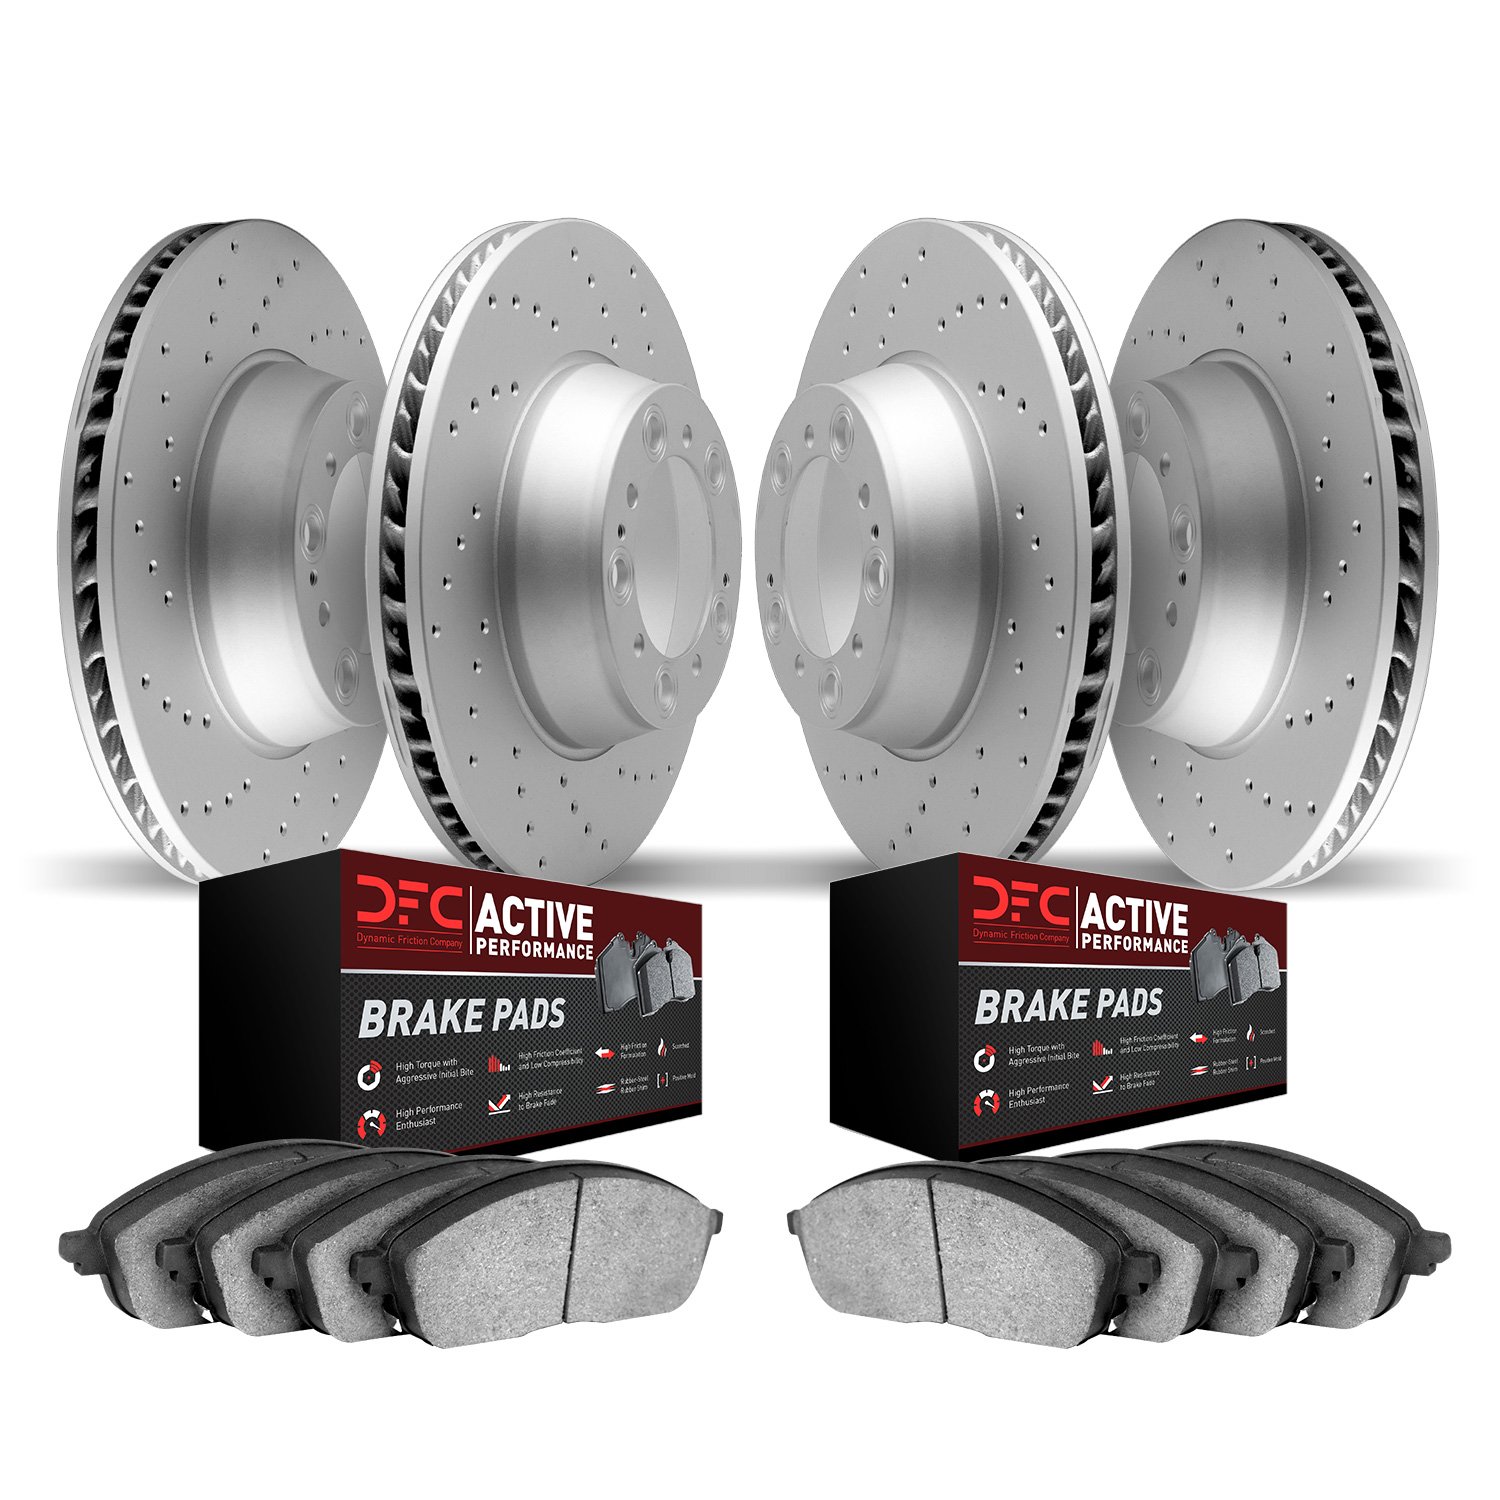 2704-54015 Geoperformance Drilled Brake Rotors with Active Performance Pads Kit, 2005-2014 Ford/Lincoln/Mercury/Mazda, Position: